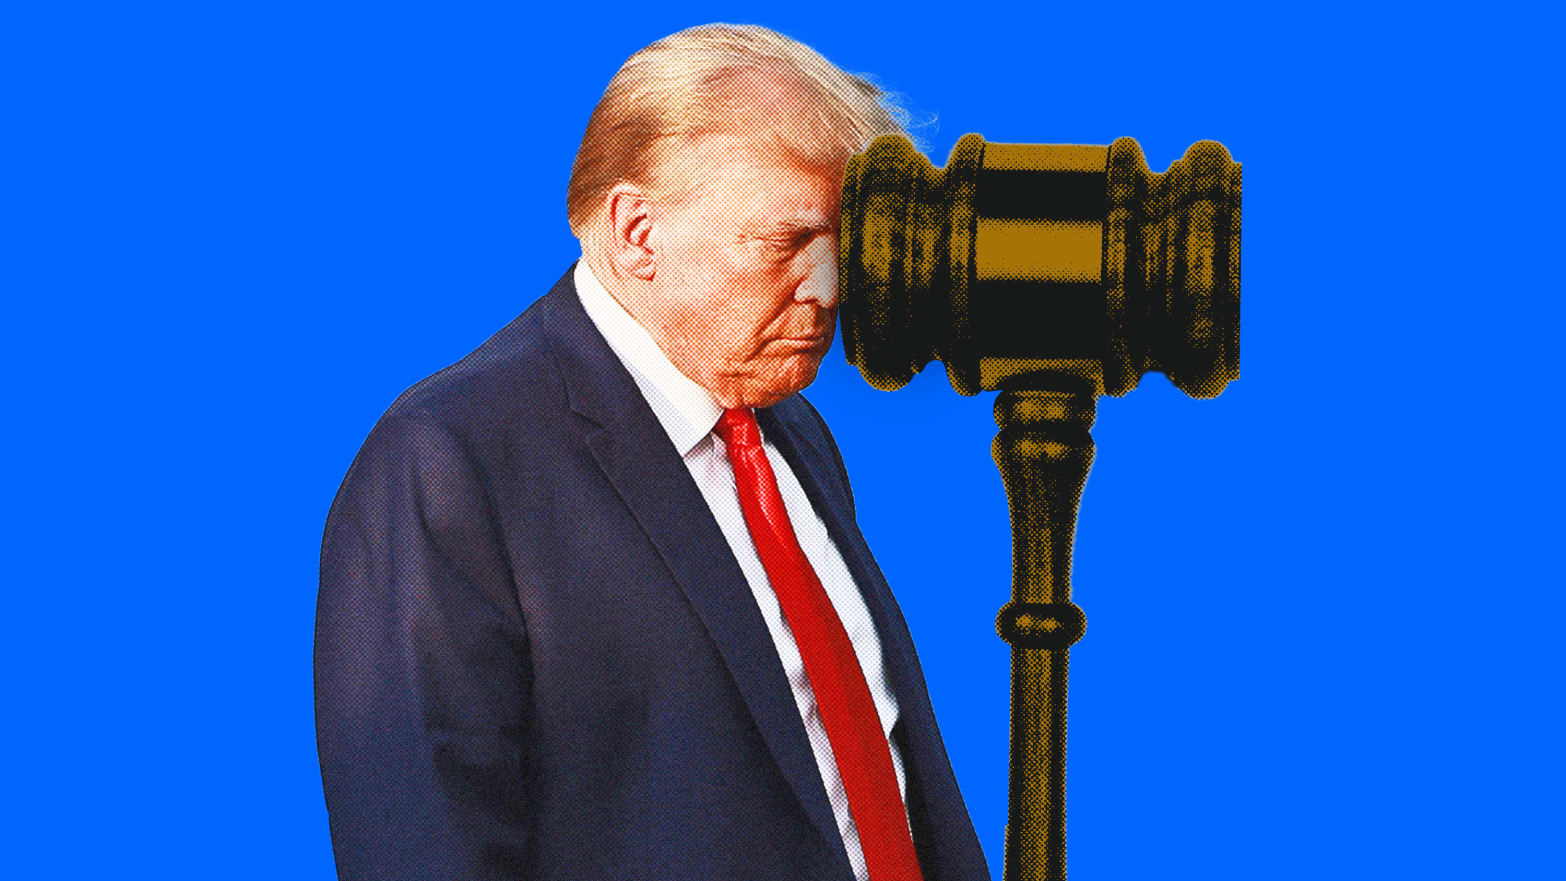 A photo composite of Donald Trump with a gavel in his face